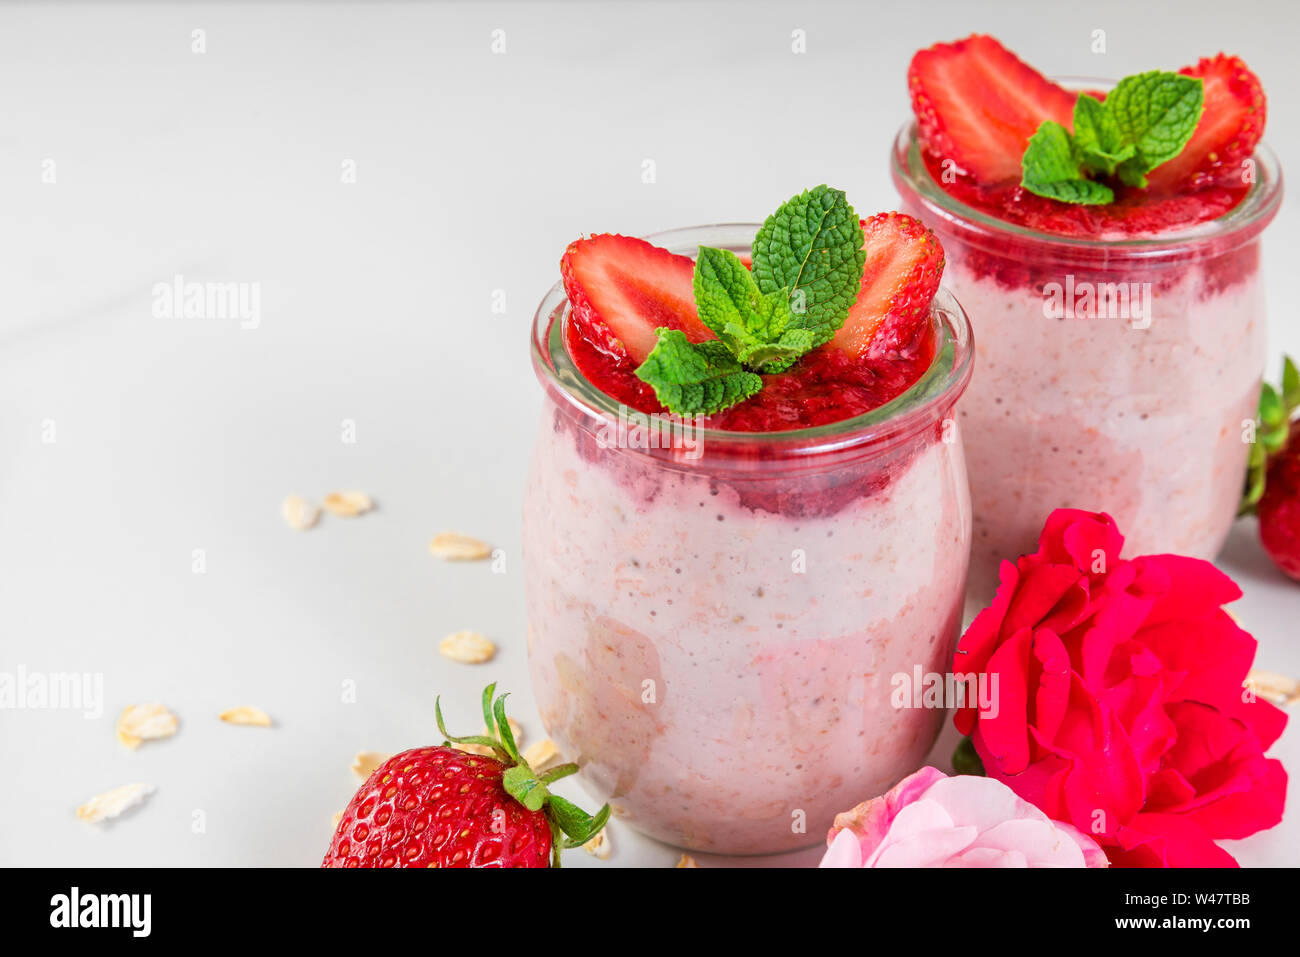 healthy diet breakfast dessert. strawberry overnight oats with fresh berries and mint with rose flowers on white marble table. close up Stock Photo